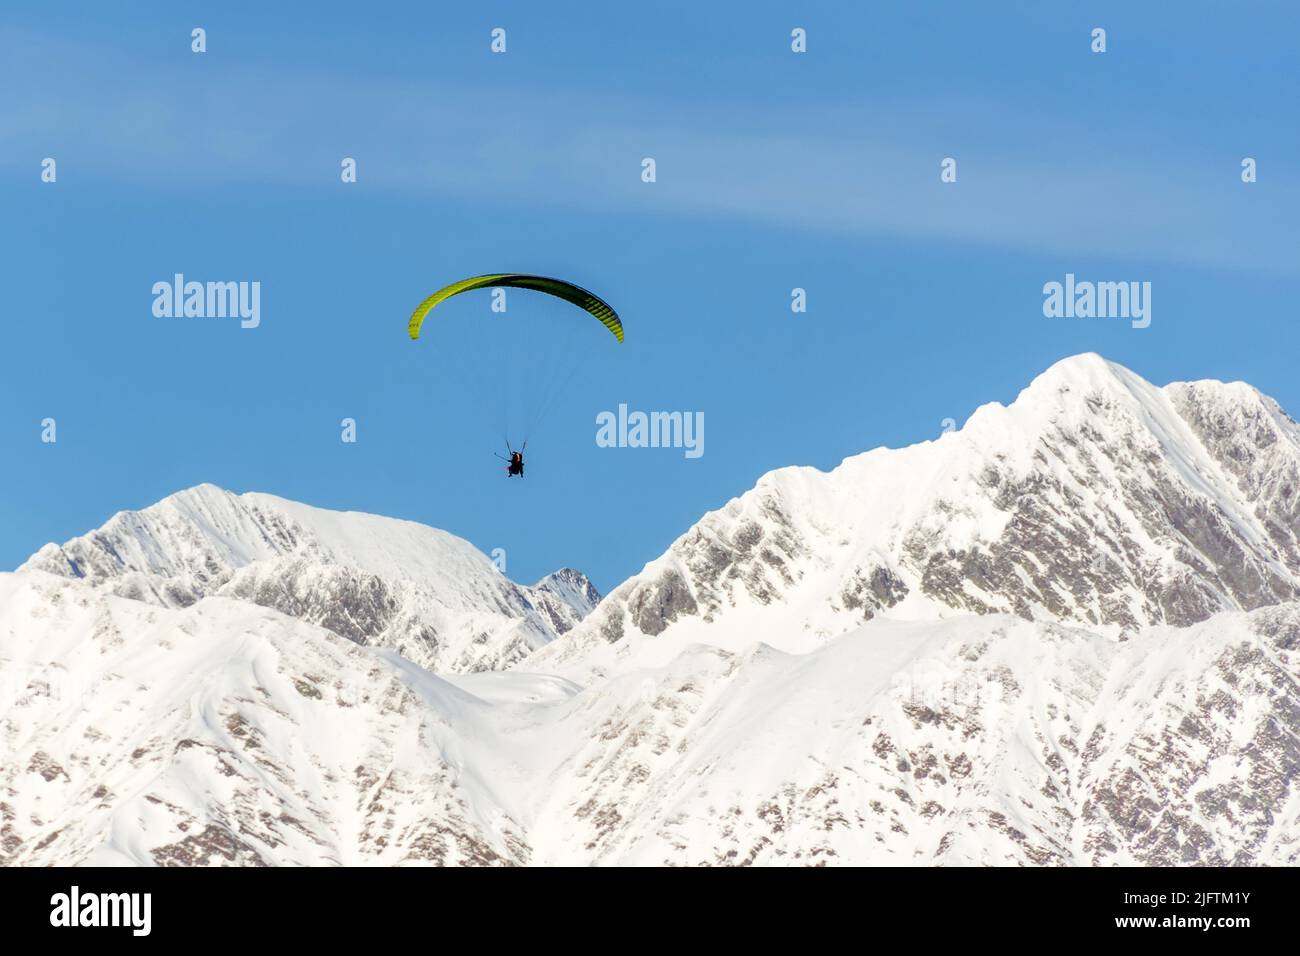 Paraglide flying flies over the snow-capped mountains valley Stock Photo